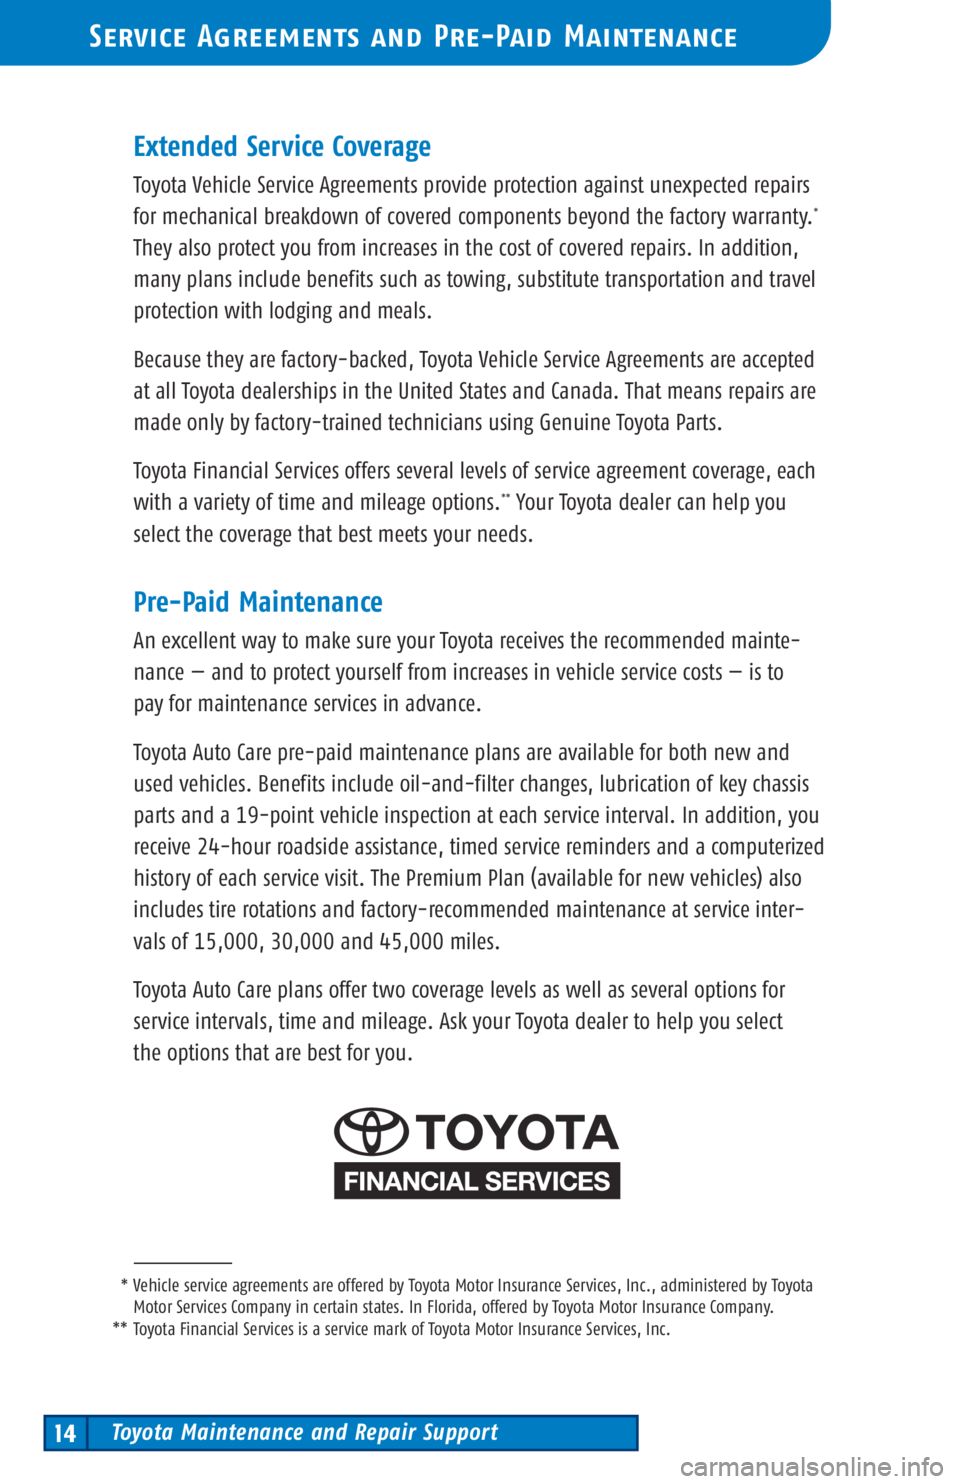 TOYOTA TACOMA 2003  Warranties & Maintenance Guides (in English) Toyota Maintenance and Repair Support14
Service Agreements and Pre-Paid Maintenance
Extended Service Coverage
Toyota Vehicle Service Agreements provide protection against unexpected repairs
formechani